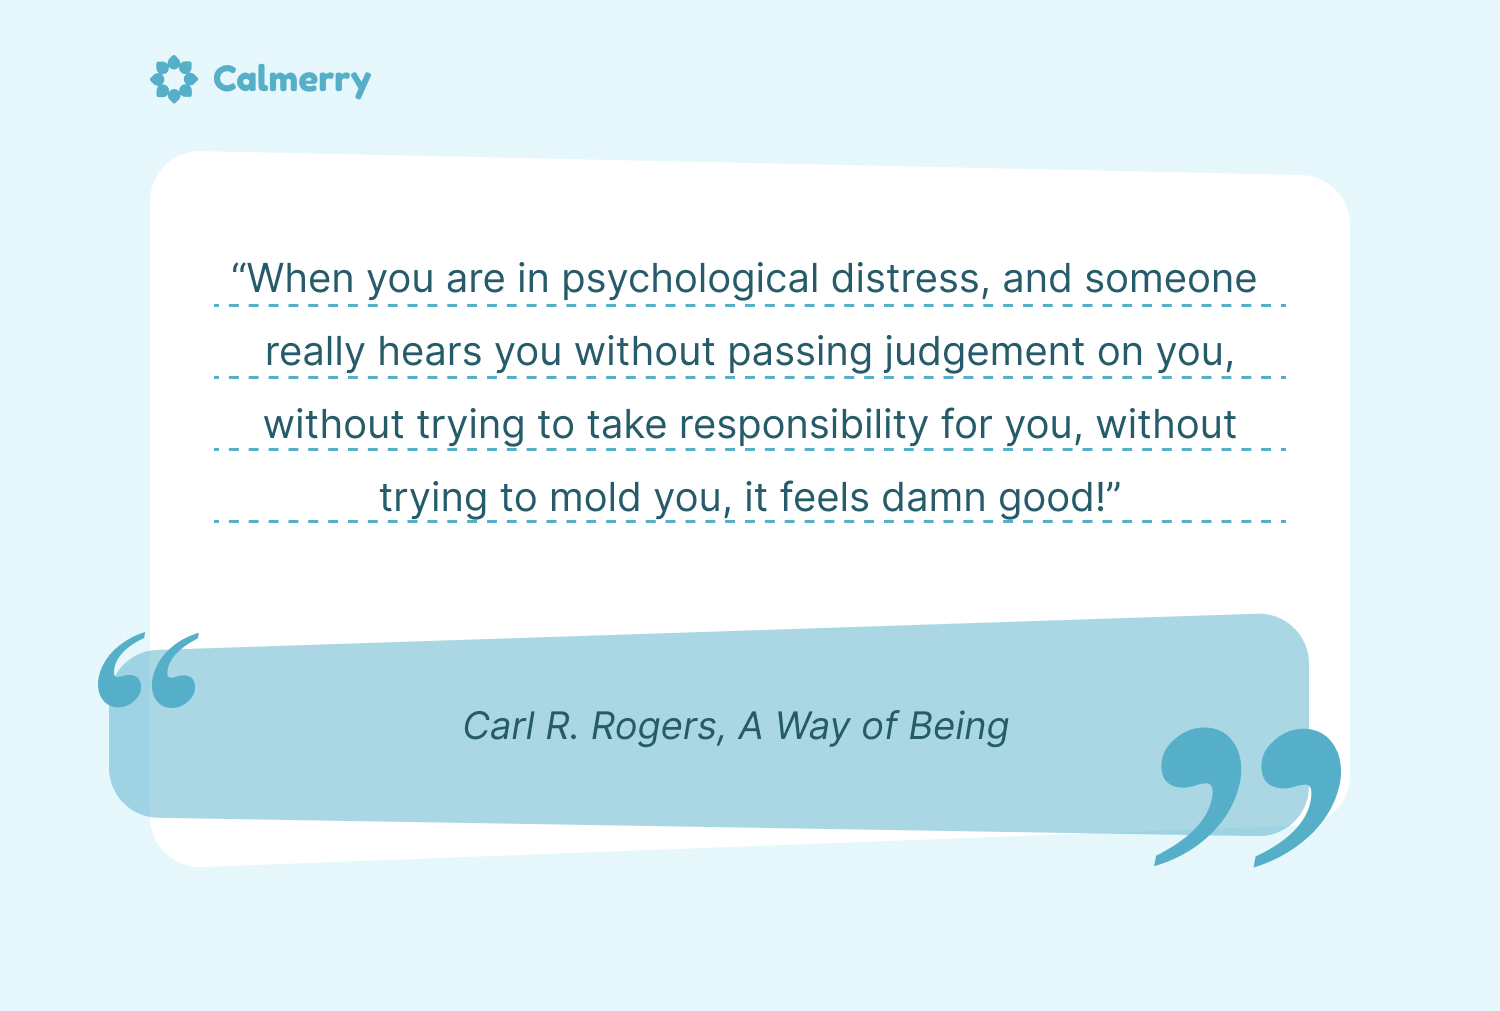 “When you are in psychological distress, and someone really hears you without passing judgement on you, without trying to take responsibility for you, without trying to mold you, it feels damn good!” ― Carl R. Rogers, A Way of Being